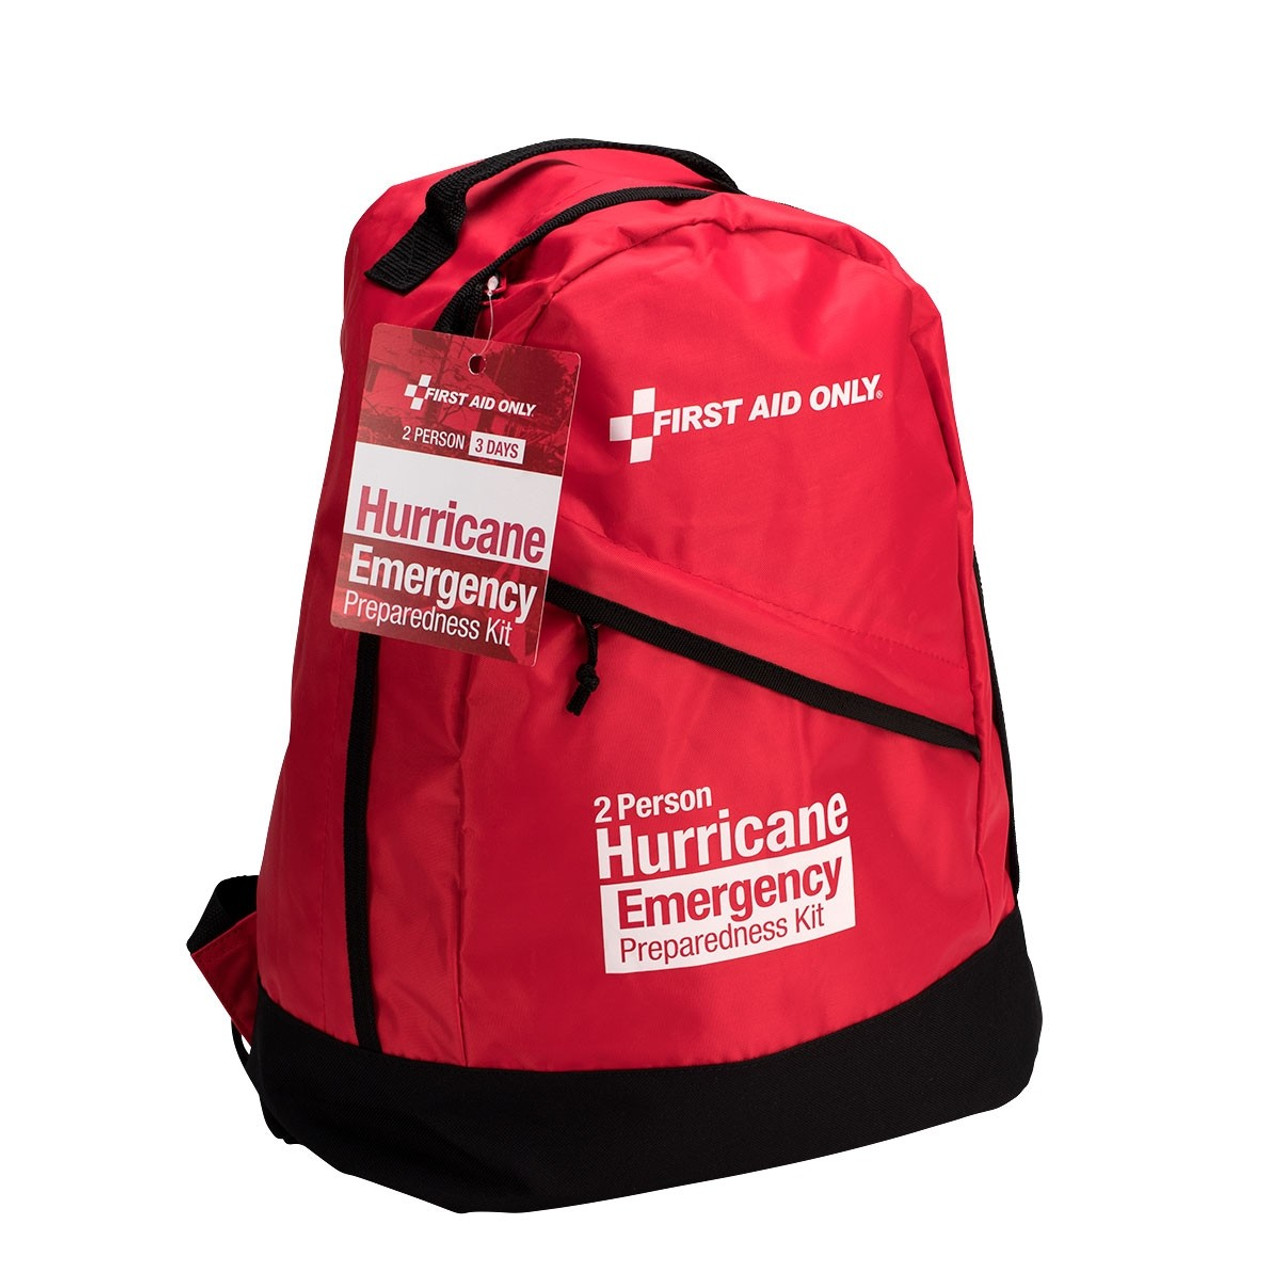 Pack storm safety into one bag - PEC